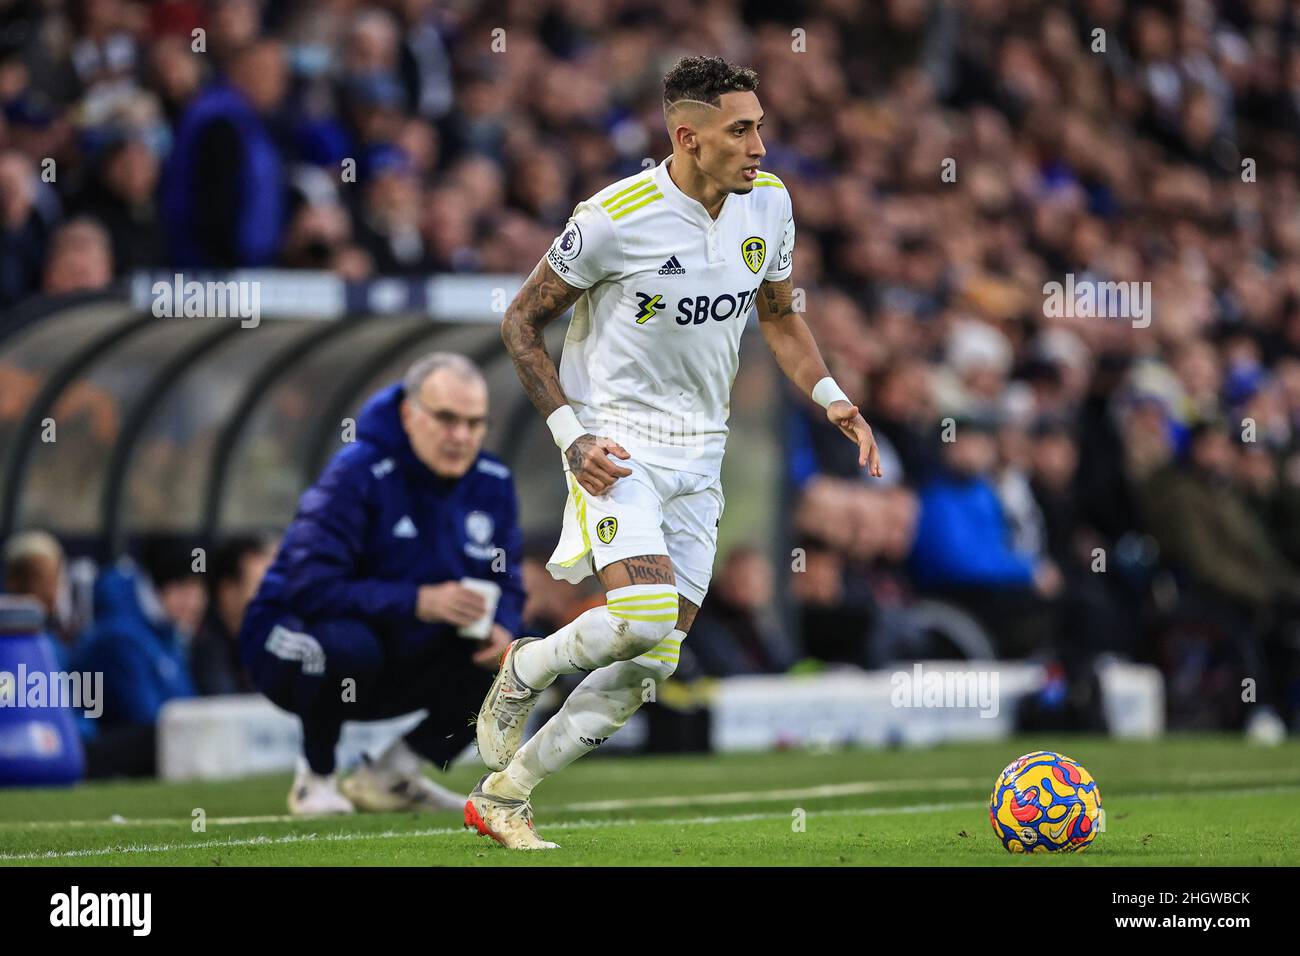 Raphinha #10 of Leeds United during the Premier League fixture Leeds United vs Newcastle United at Elland Road, Leeds, UK. 22nd Jan, 2022. Credit: News Images /Alamy Live News Stock Photo